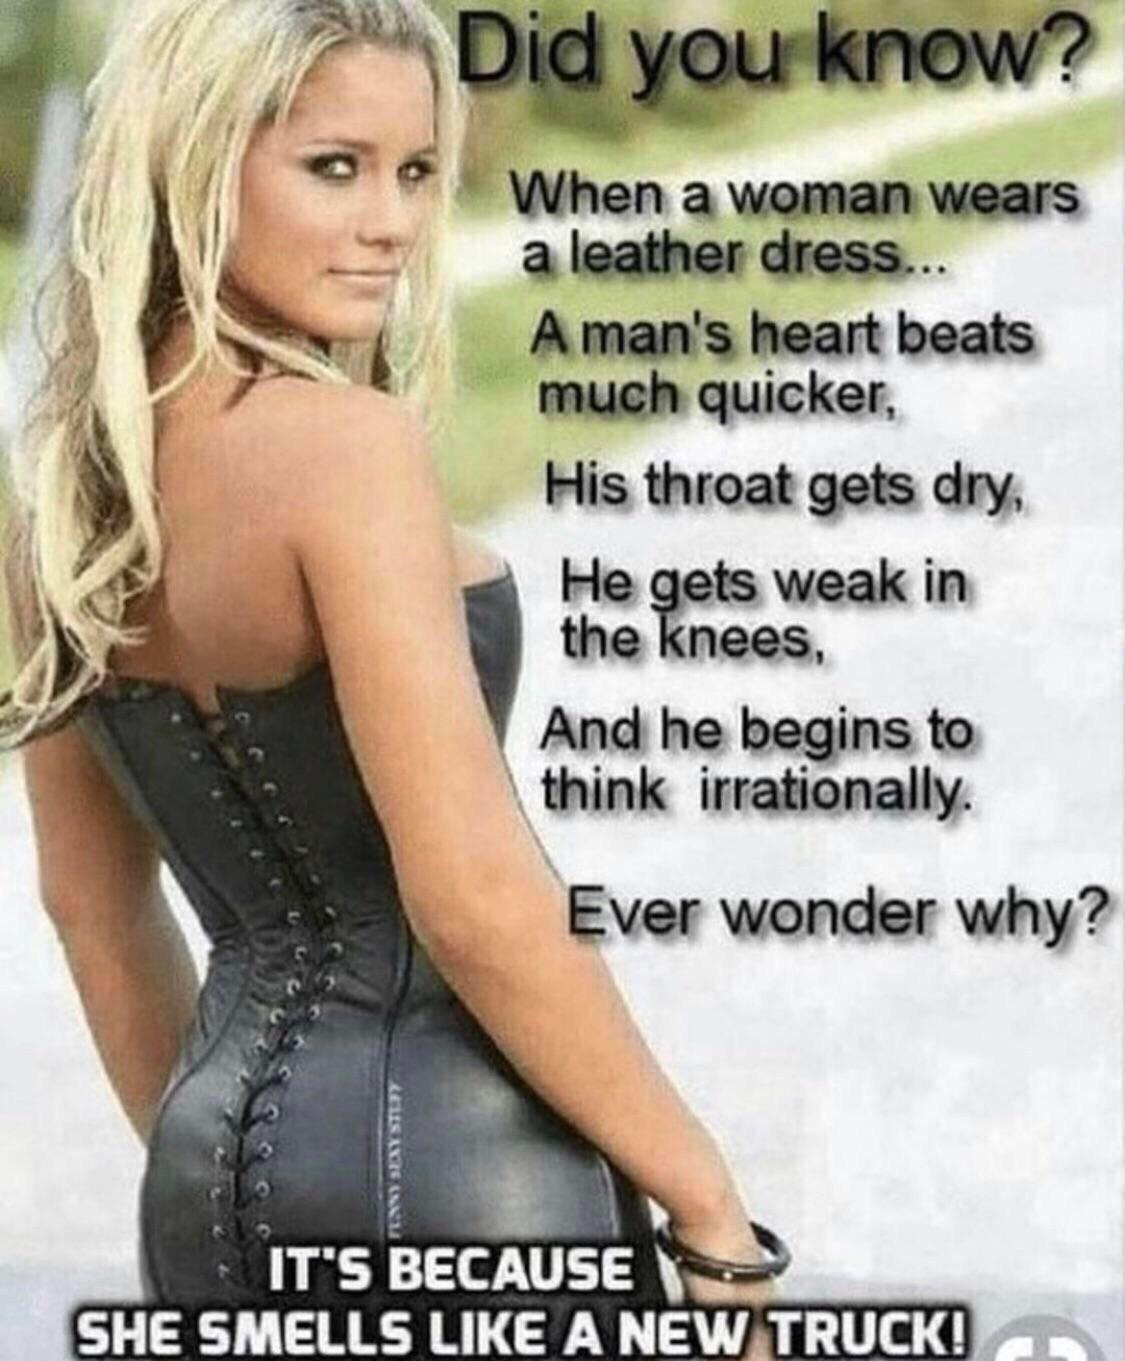 because she smells like a new truck - Did you know? When a woman wears a leather dress... A man's heart beats much quicker, His throat gets dry He gets weak in the knees, And he begins to think irrationally. Ever wonder why? Cousas It'S Because She Smells